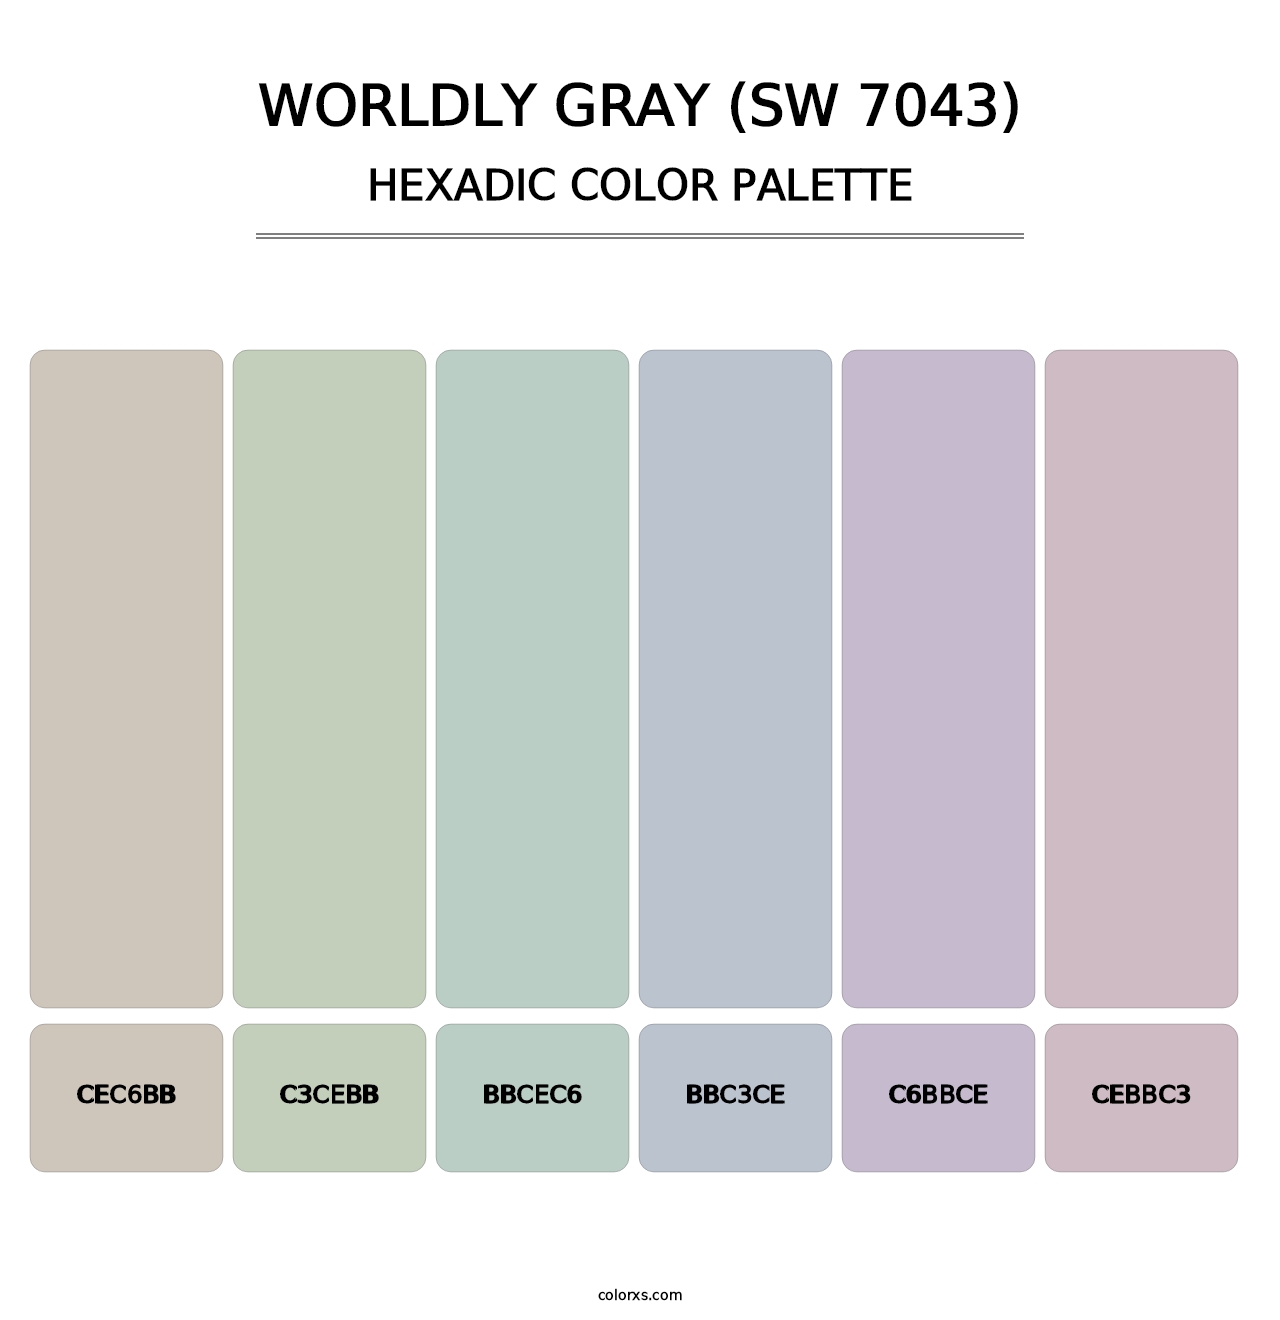 Worldly Gray (SW 7043) - Hexadic Color Palette